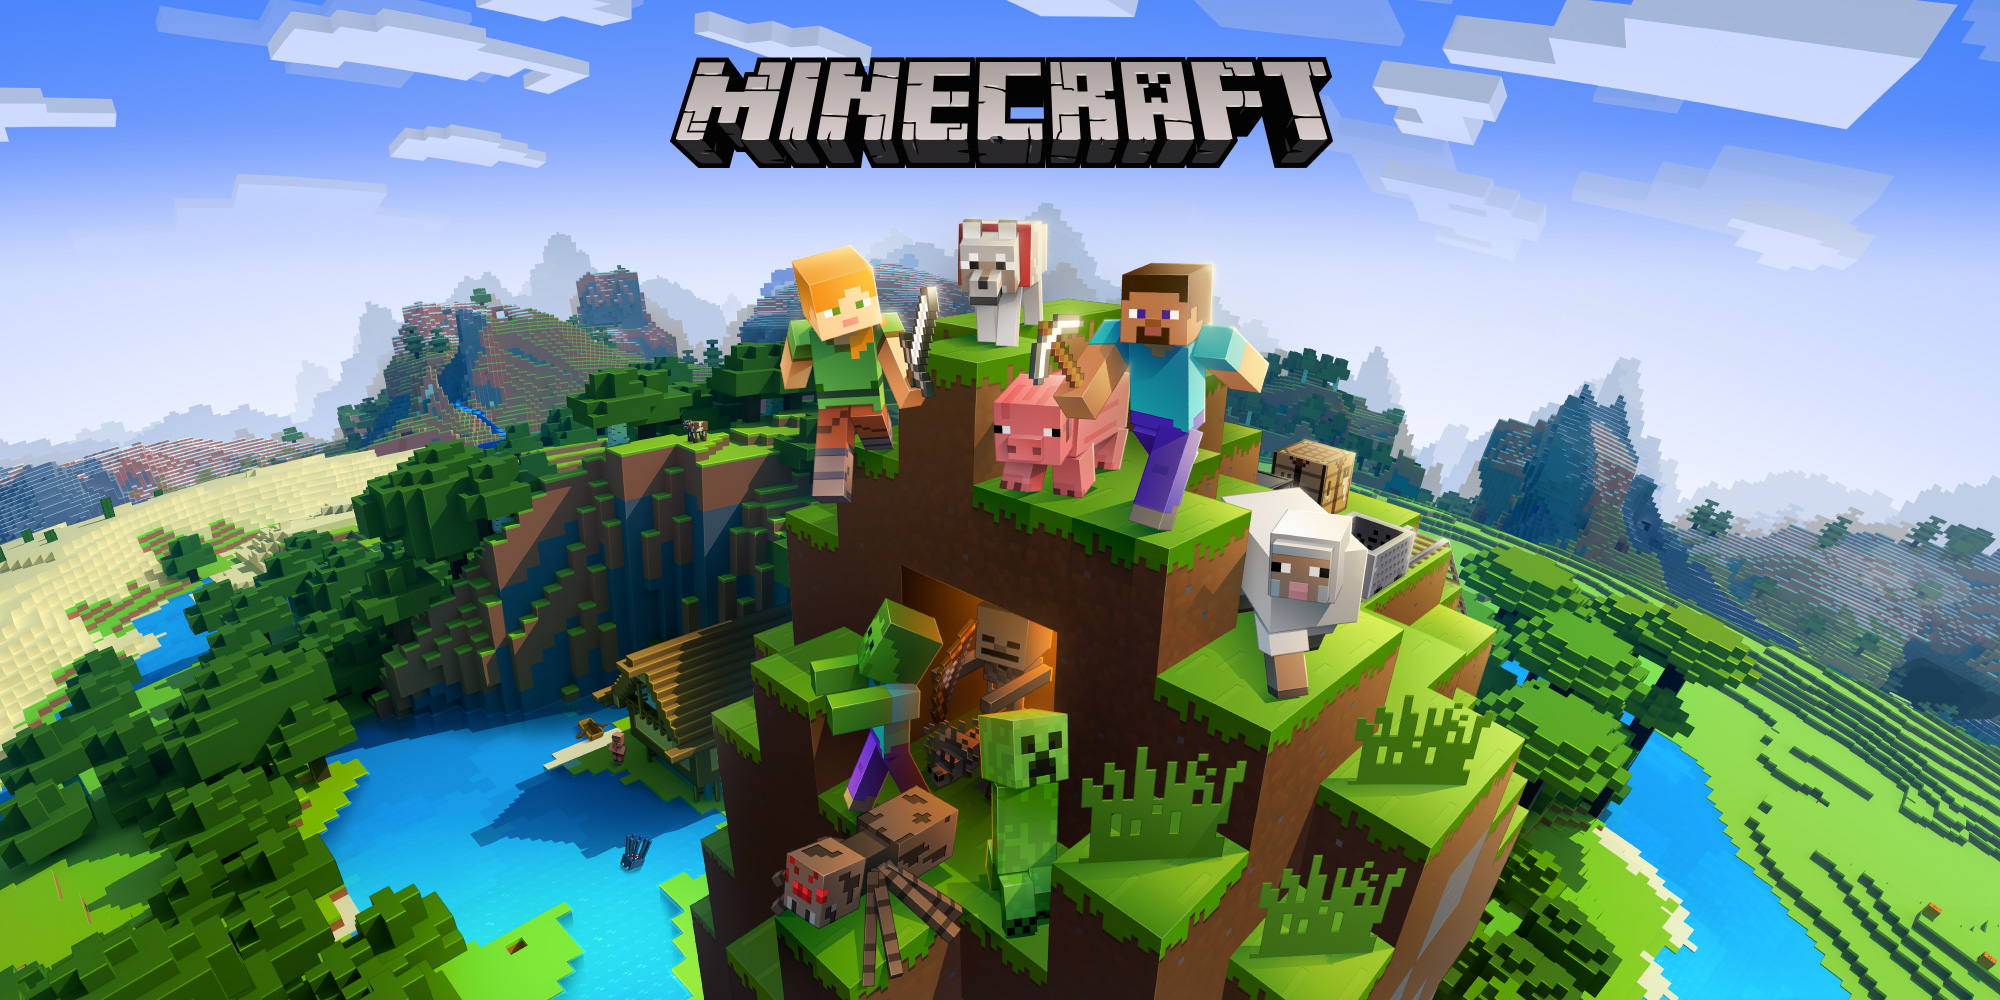 Best game for low-end PCs - Minecraft